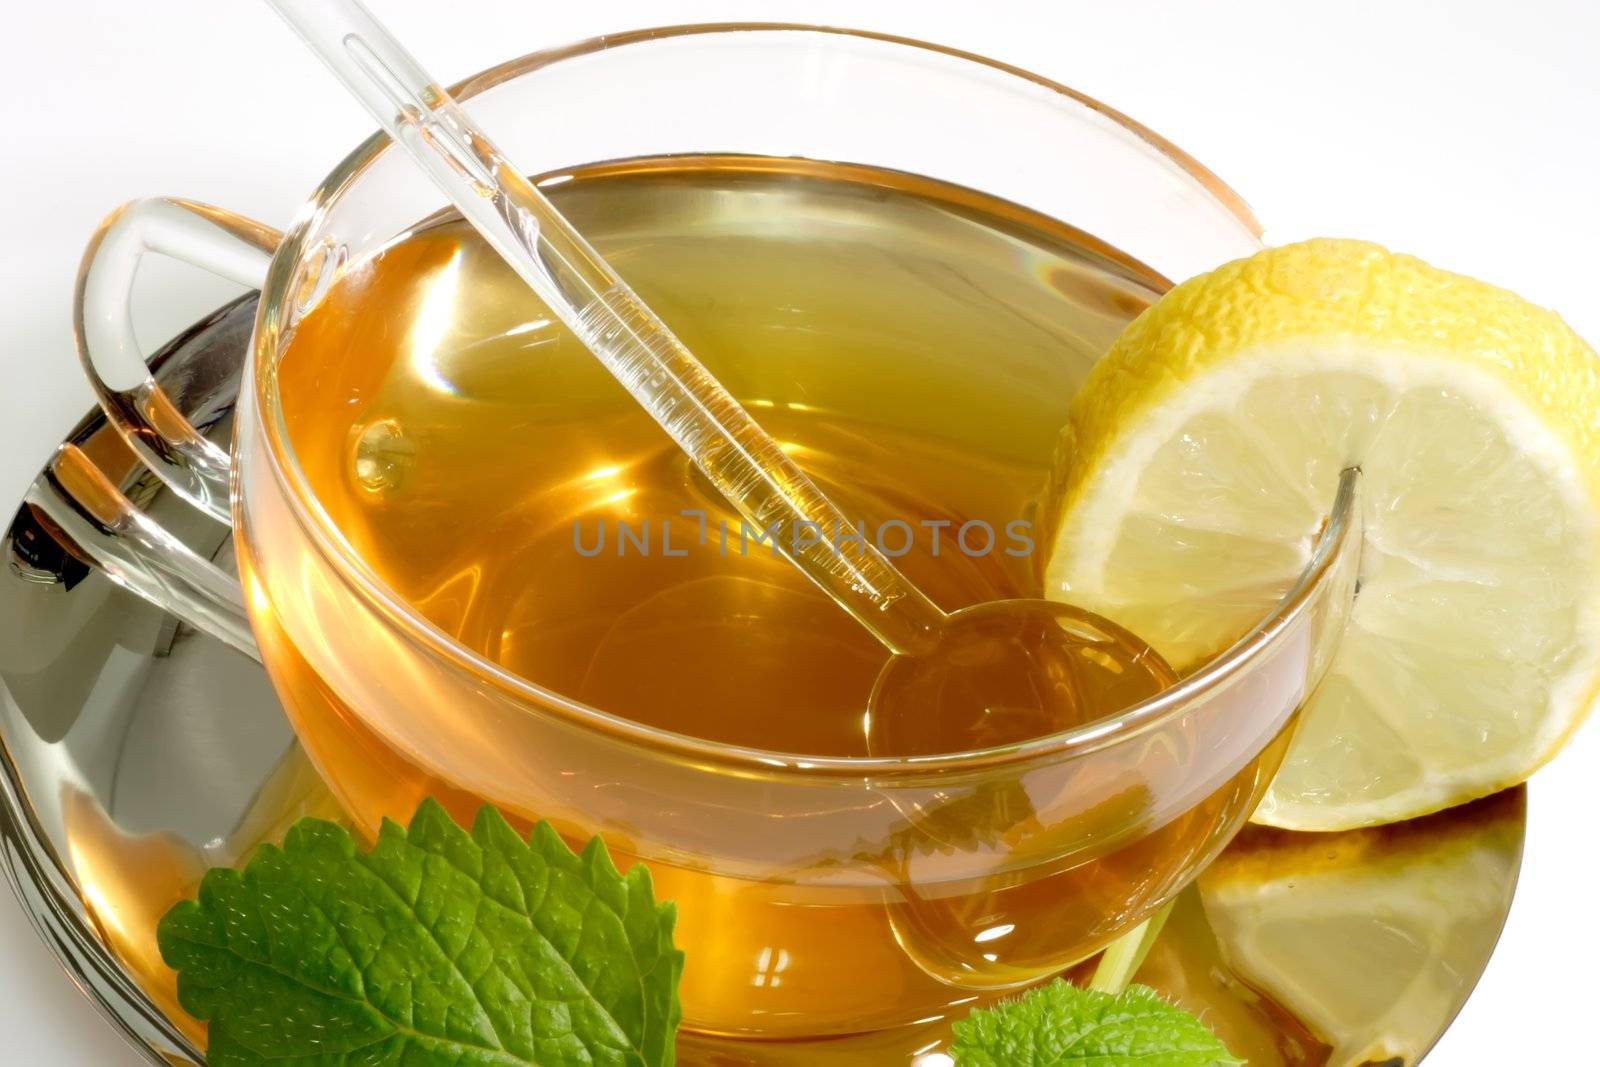 Lemon balm tea in a glass cup with garnish on light background